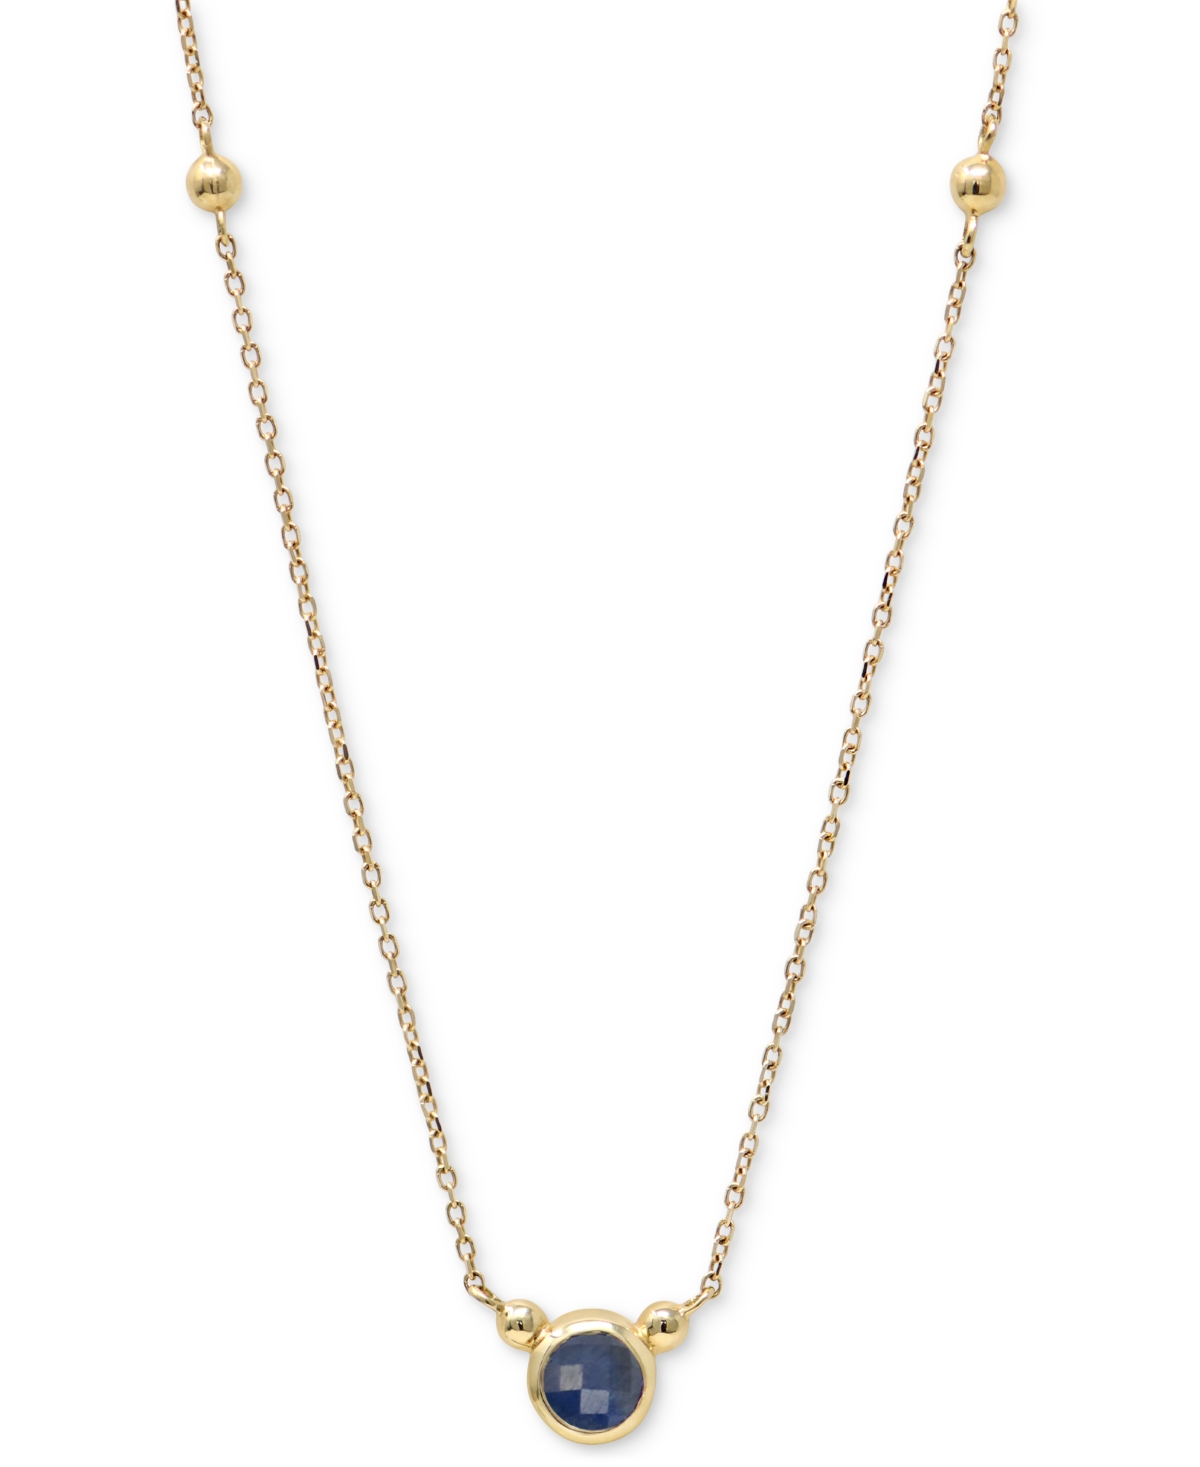 Anzie Sapphire Bezel Solitaire Pendant Necklace In 14k Gold, 14" + 2" Extender (also In Moonstone)